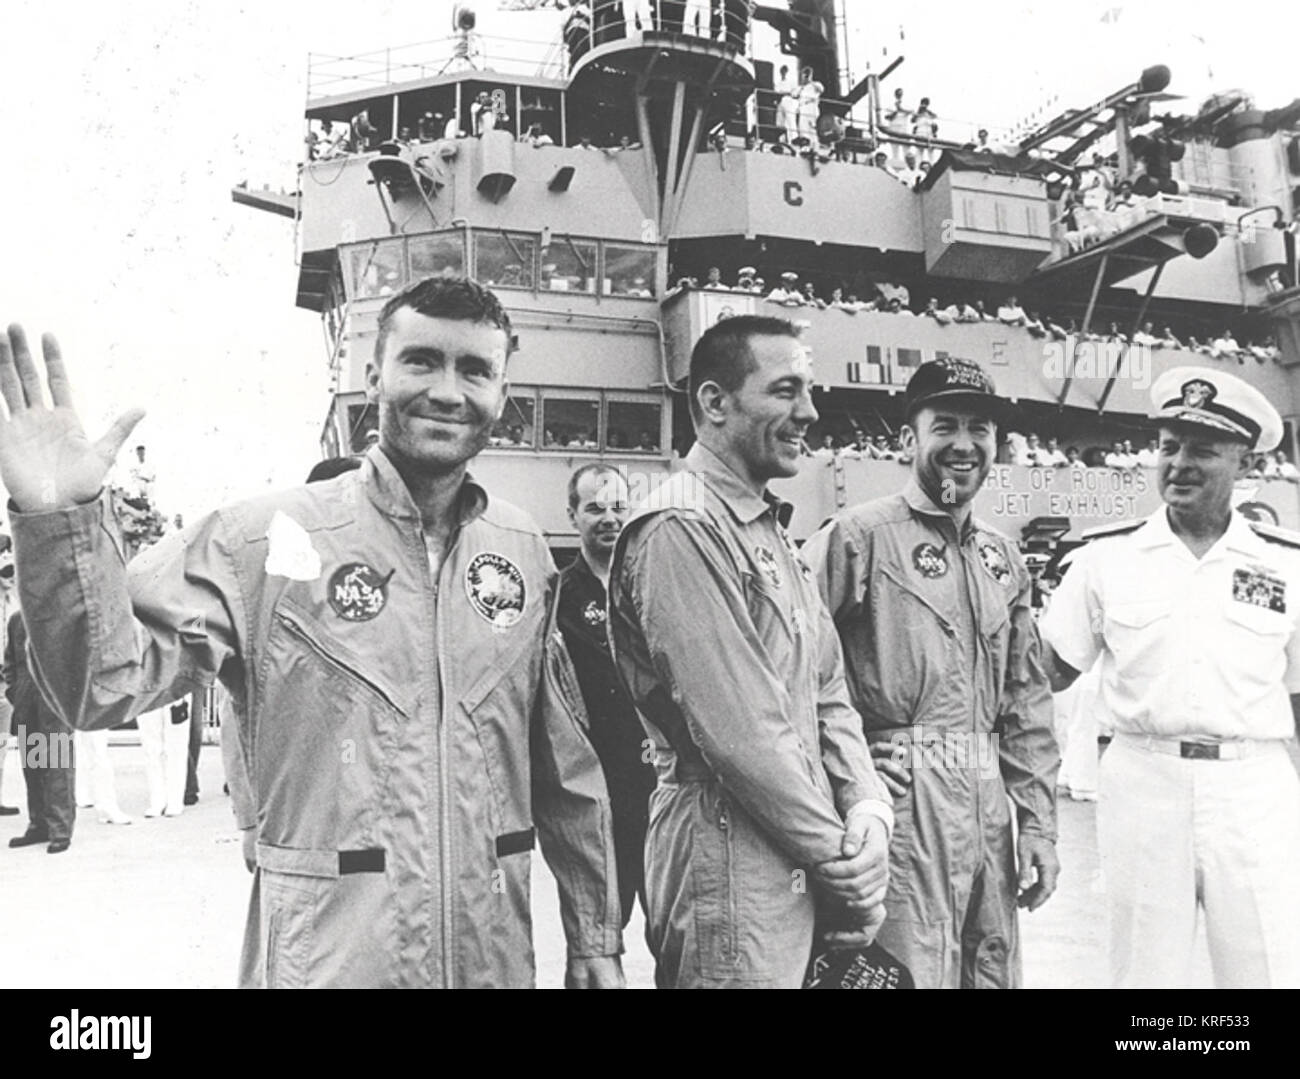 REAR ADMIRAL DONALD C. DAVIS, COMMANDING OFFICER OF TASK FORCE 130, PACIFIC RECOVERY FORCES FOR THE MANNED SPACECRAFT MISSIONS, WELCOMES THE APOLLO 13 CREW ABOARD THE USS IWO JIMA, PRIME RECOVERY SHIP FOR THE MISSION.  THE CREWMEN ARE (LEFT TO RIGHT) FRED W. HAISE, JR., LUNAR MODULE PILOT, JOHN L. SWIGERT, JR., COMMAND MODULE PILOT, AND JAMES A. LOVELL, JR., MISSION COMMANDER. THE SPACECRAFT SPLASHED DOWN WITHIN SIGHT OF THE CARRIER TO SAFELY END A PERILOUS JOURNEY. Załoga Apollo 13 na pokładzie USS Iwo Jima 7008011 Stock Photo